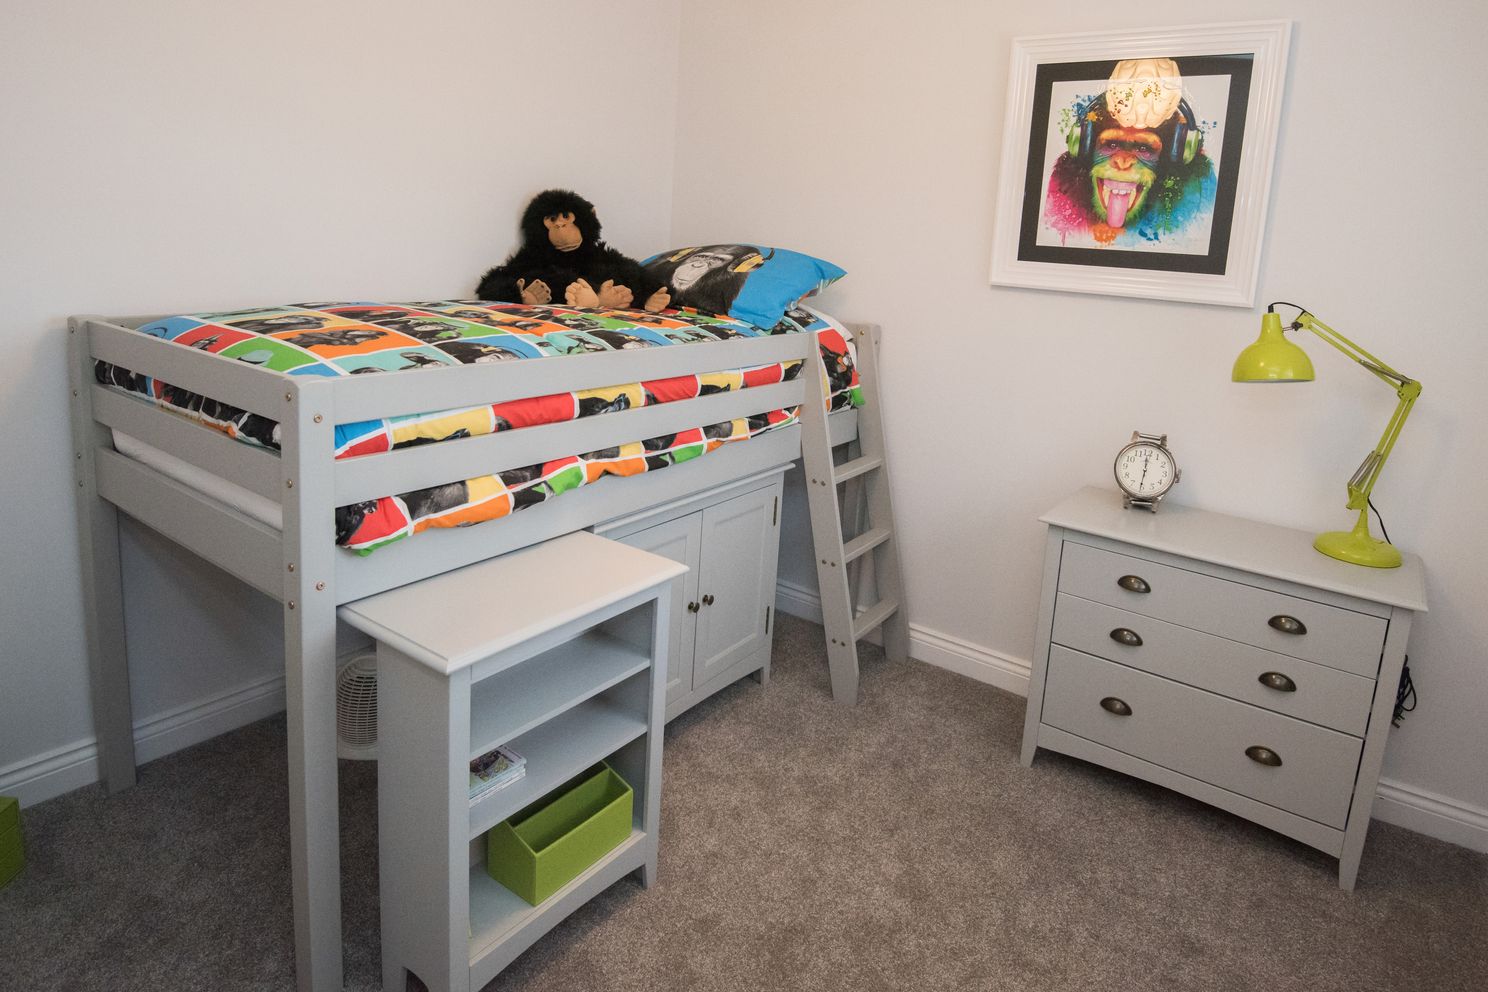 The new show home opens on Yaddlethorpe Grange in Scunthorpe  Bedroom Picture Sarah Washbournwwwyell